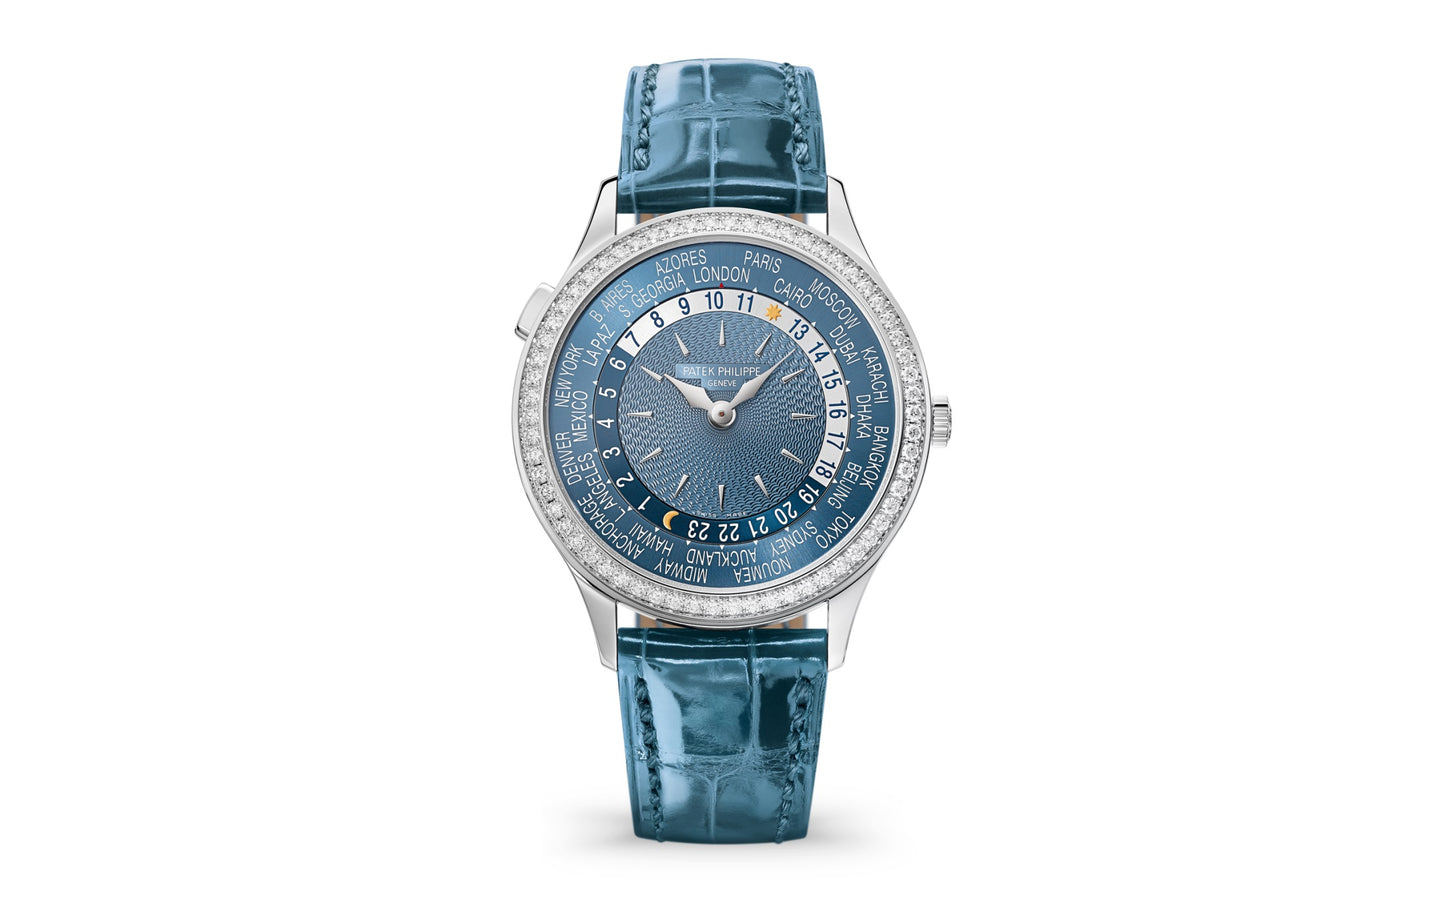 Patek Philippe Women’s Complication World-Time, 18k White Gold set with 89 diamonds (~1.03 ct.), 36mm, Ref# 7130G-016, 1